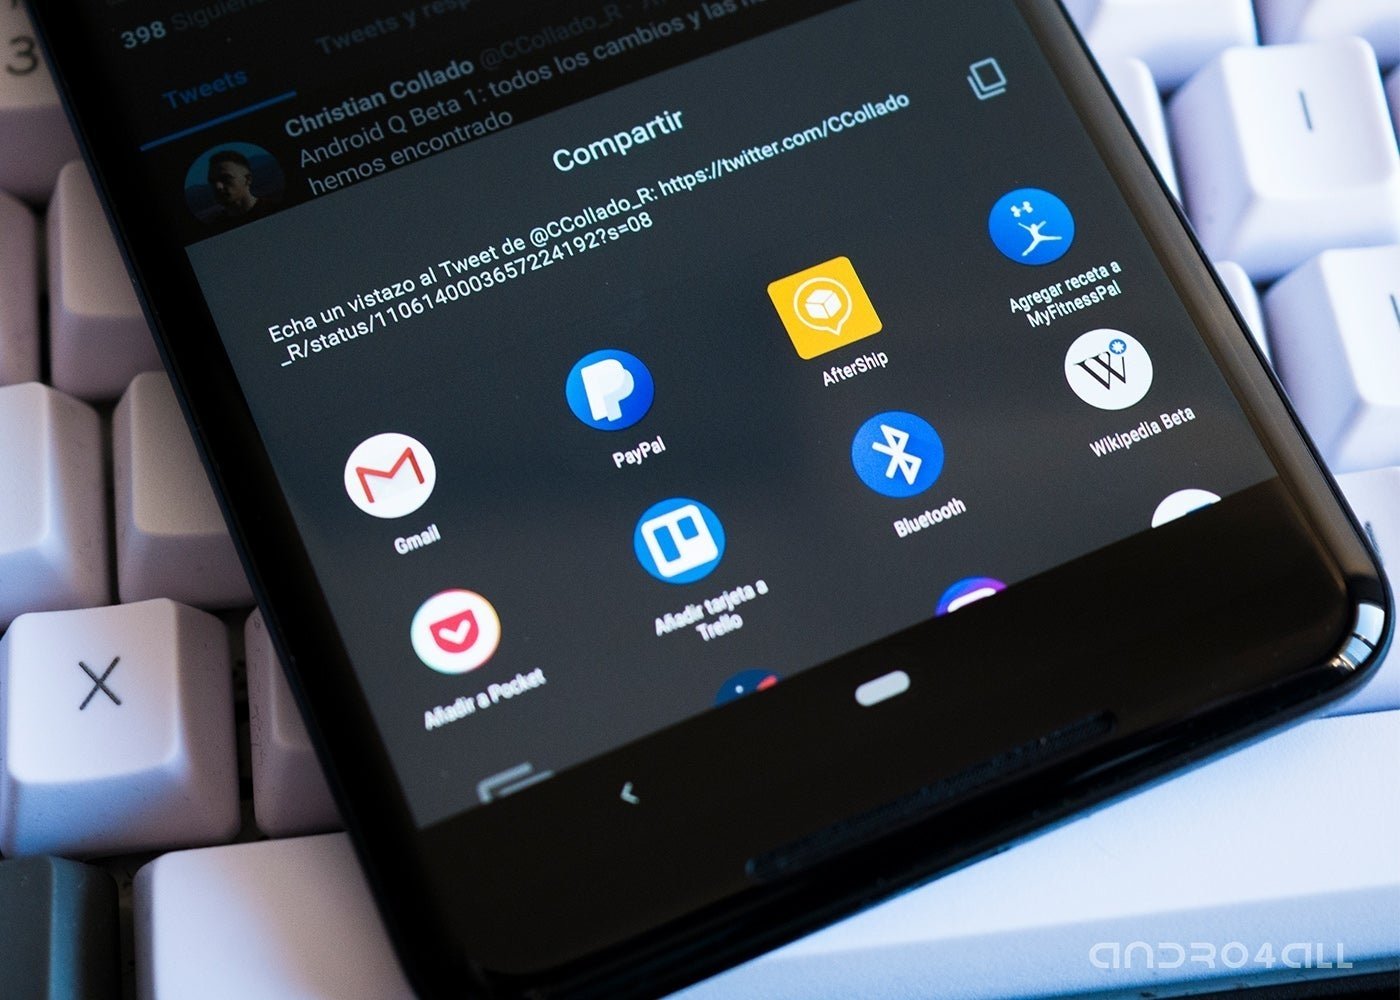 Android 10 is official: the tenth version of the operating system brings dark theme, new gestures and more